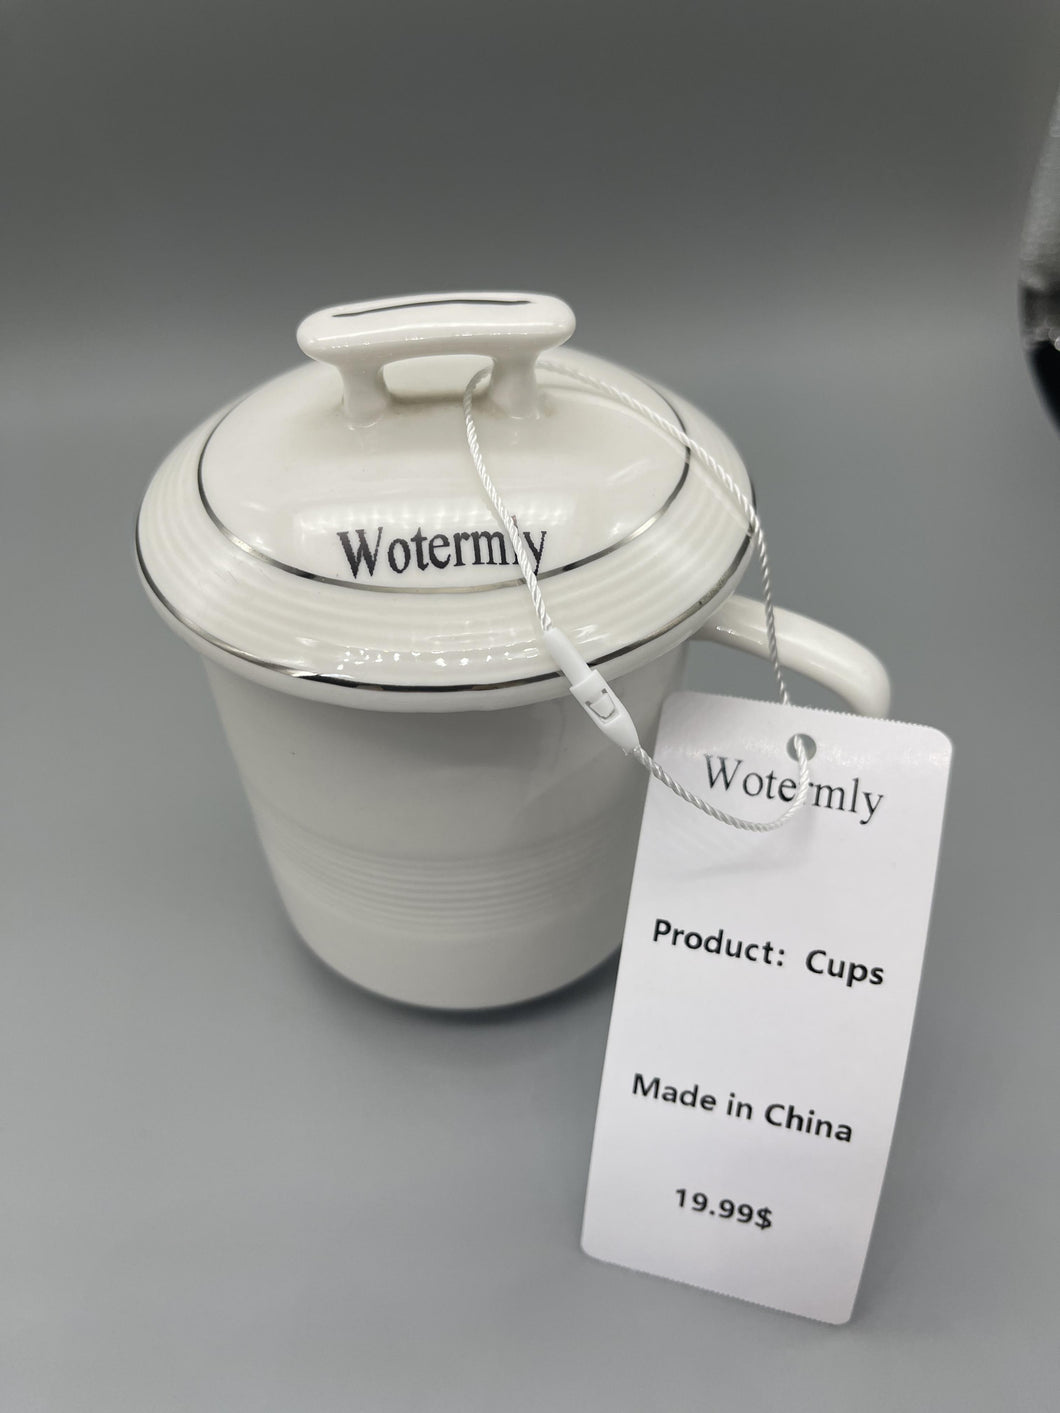 Wotermly cups, Ceramic Mug, Fancy Tea Cup with Silver Trim, China Tea Cups with Lid, Flower Tea Cup, Suitable for Making Tea, Cold Drinks, Hot Drinks, Coffee, Etc, 10oz (about 300ml)